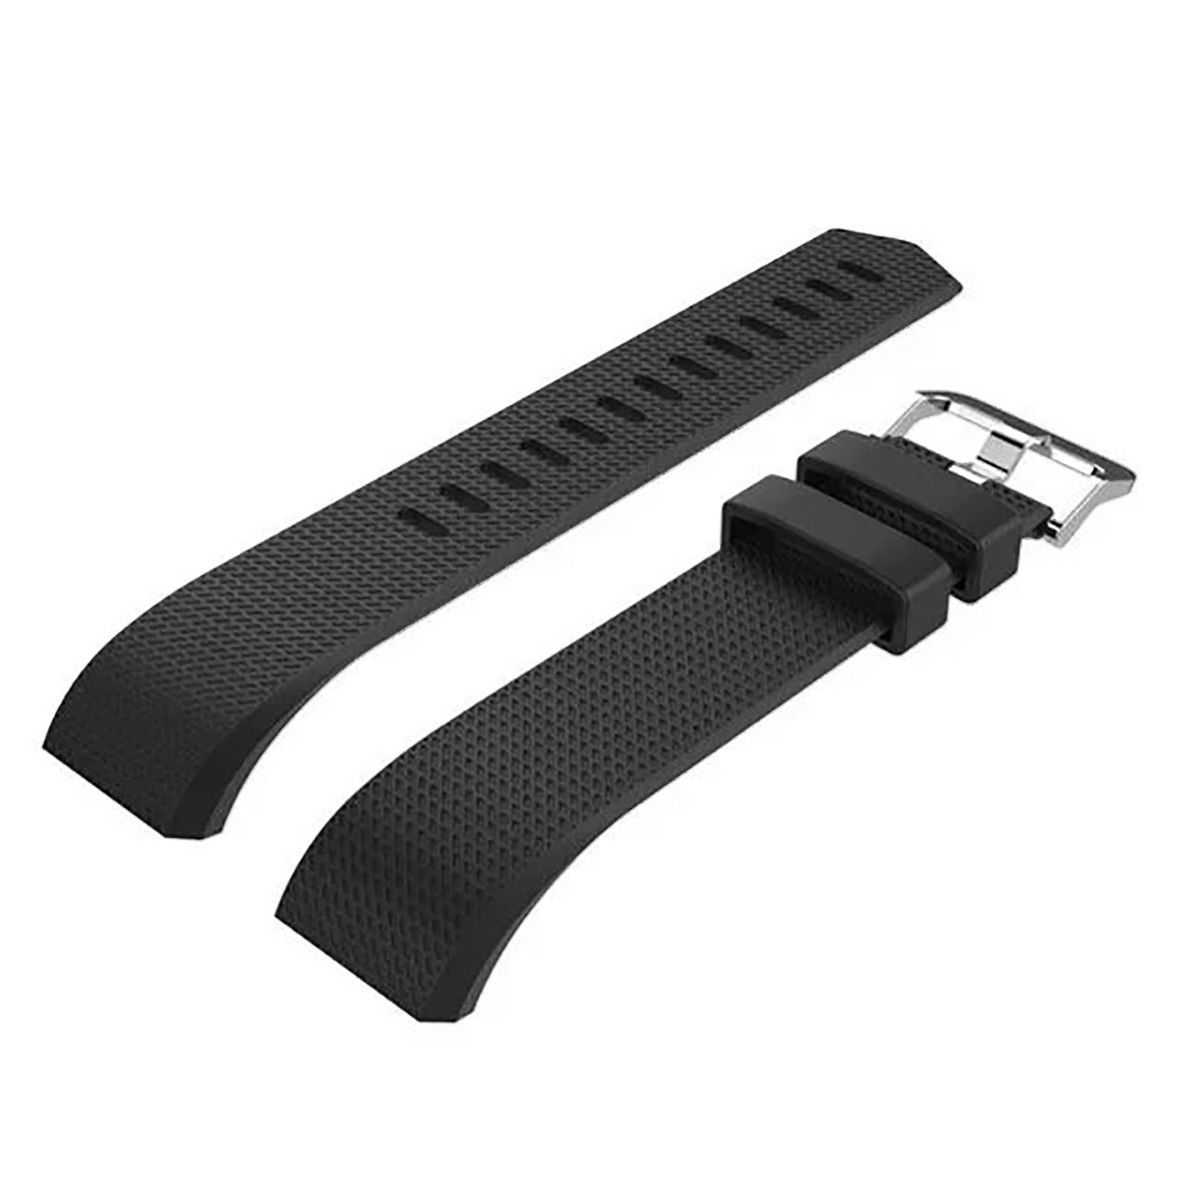 Fitbit Charge 2 Watch Bands, Mignova Soft Silicone Replacement Sport Watch Wrist Band Strap for Fitbit Charge 2 Fitness Tracker - Large Size [5 Color Pack] - image 5 of 5